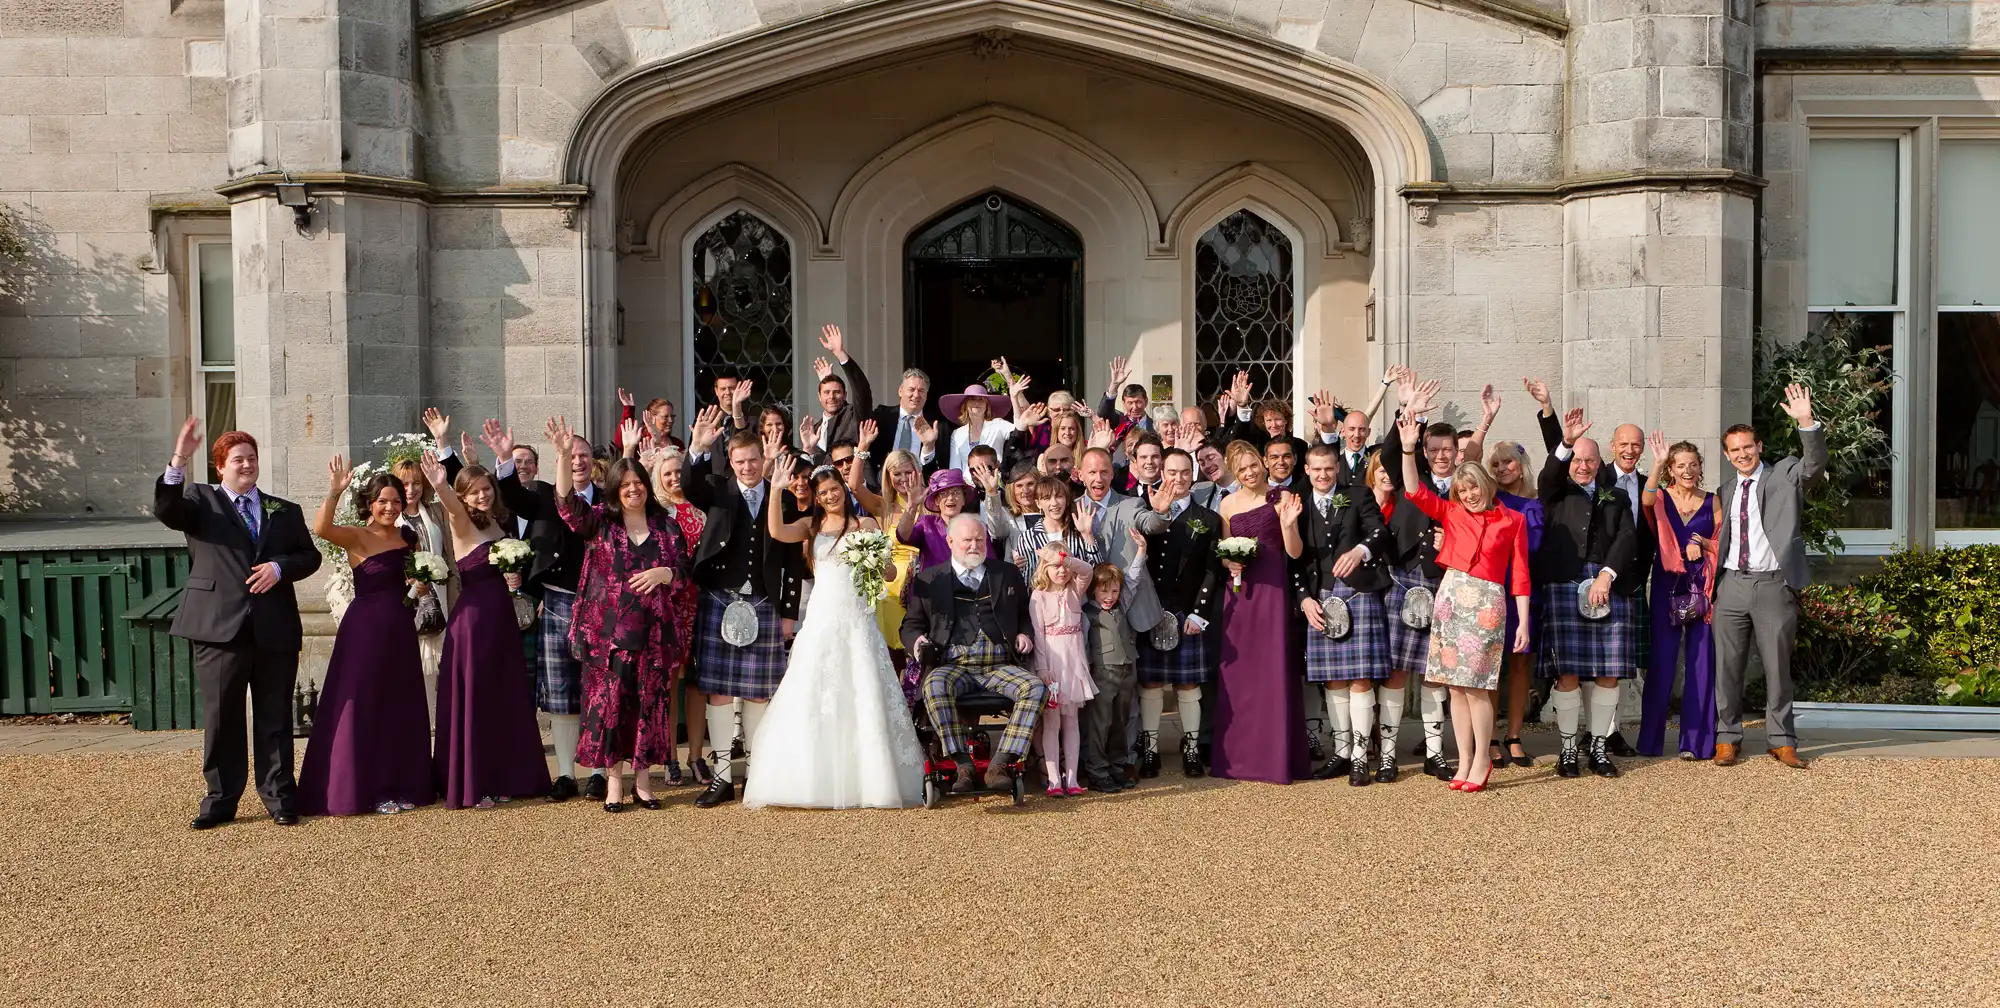 A large group of wedding guests celebrating outside a grand stone building, with the bride in a white dress and attendees in formal attire including kilts.